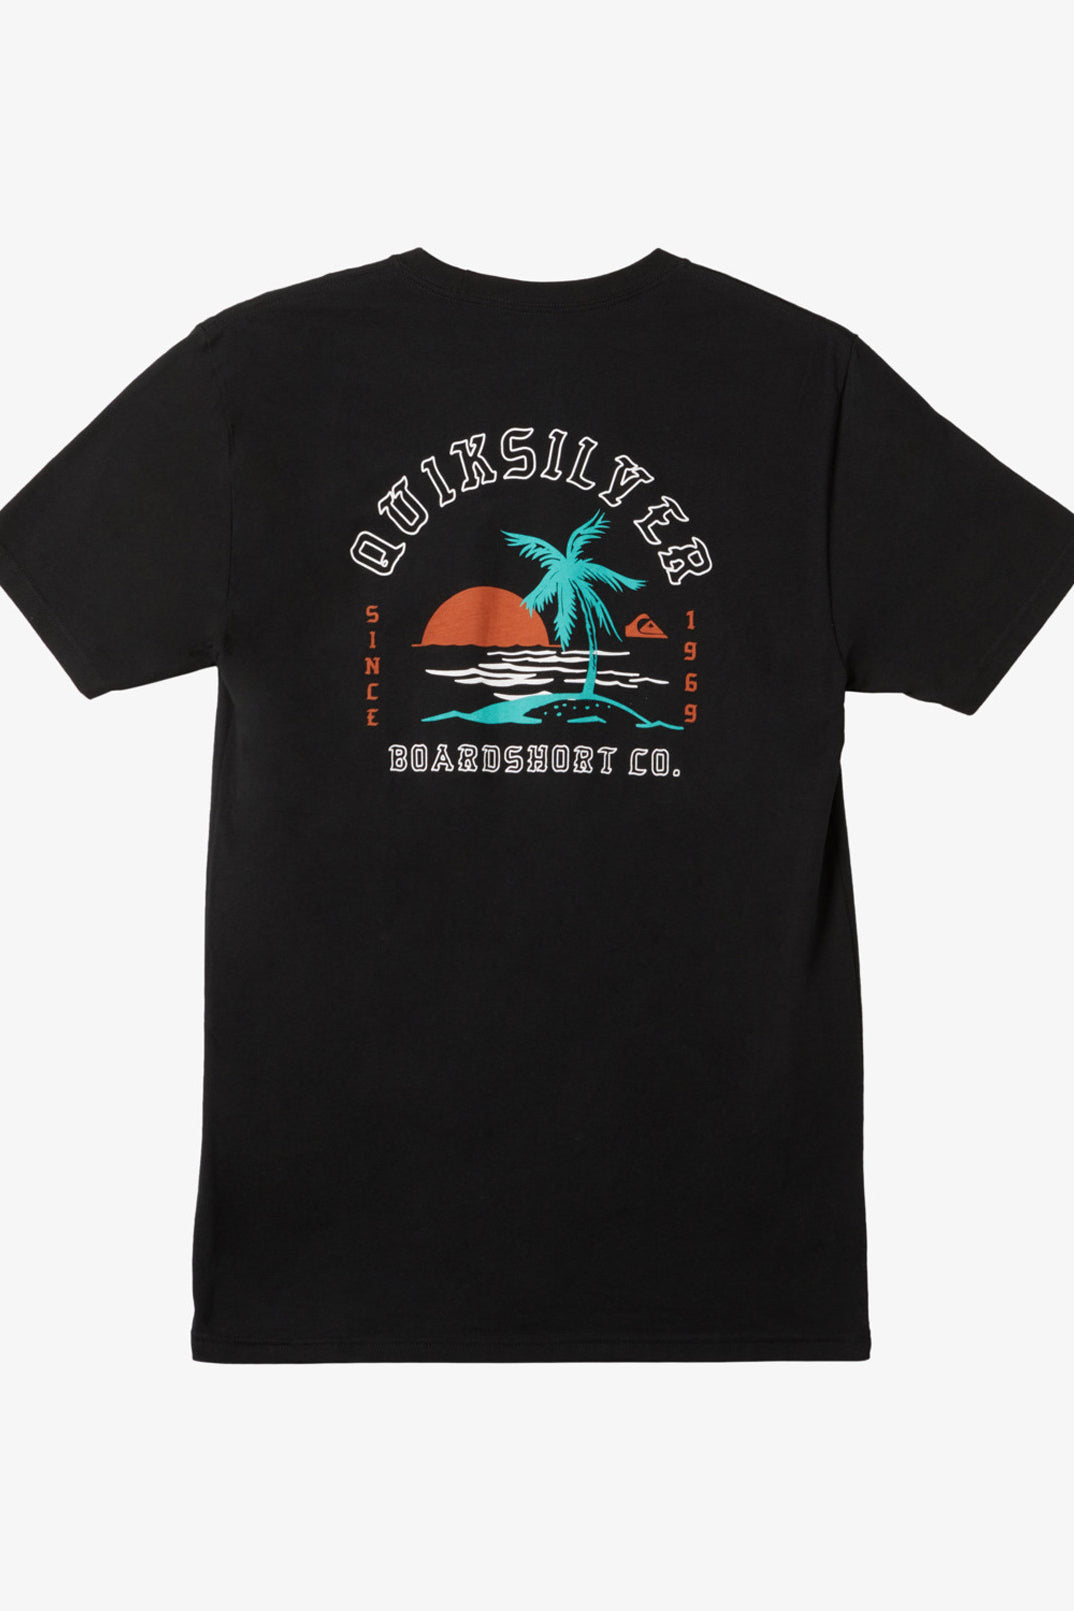 Quiksilver: Alone At Last T-Shirt